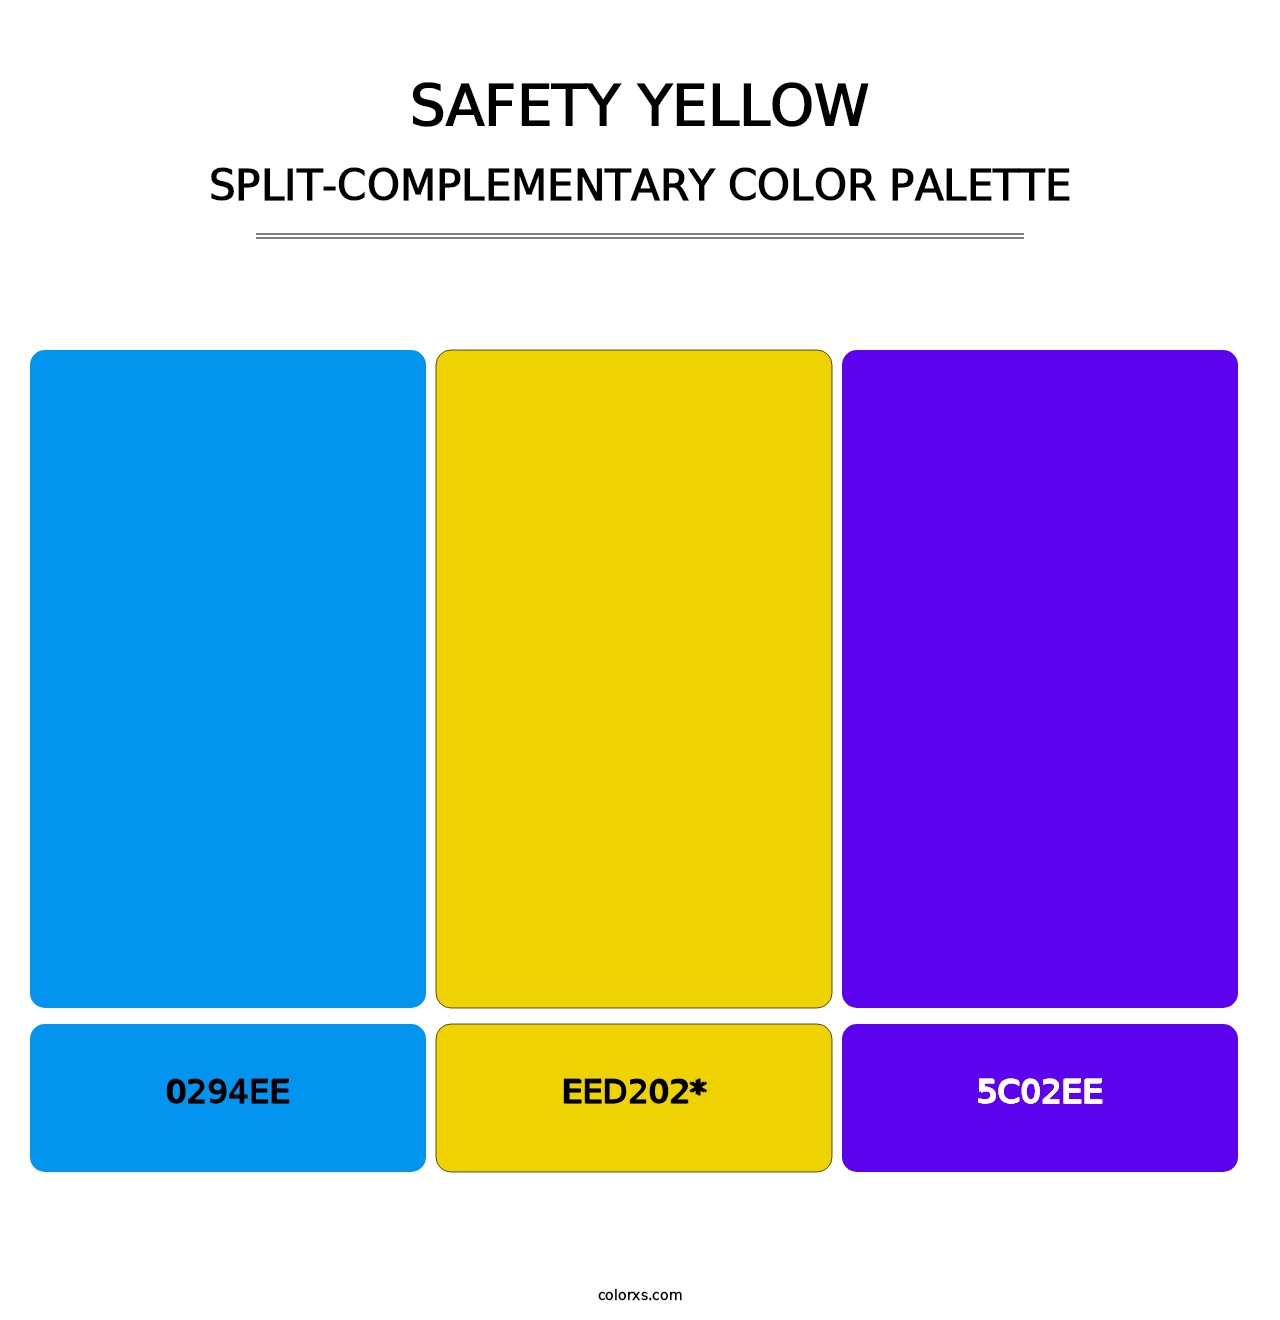 Safety Yellow - Split-Complementary Color Palette